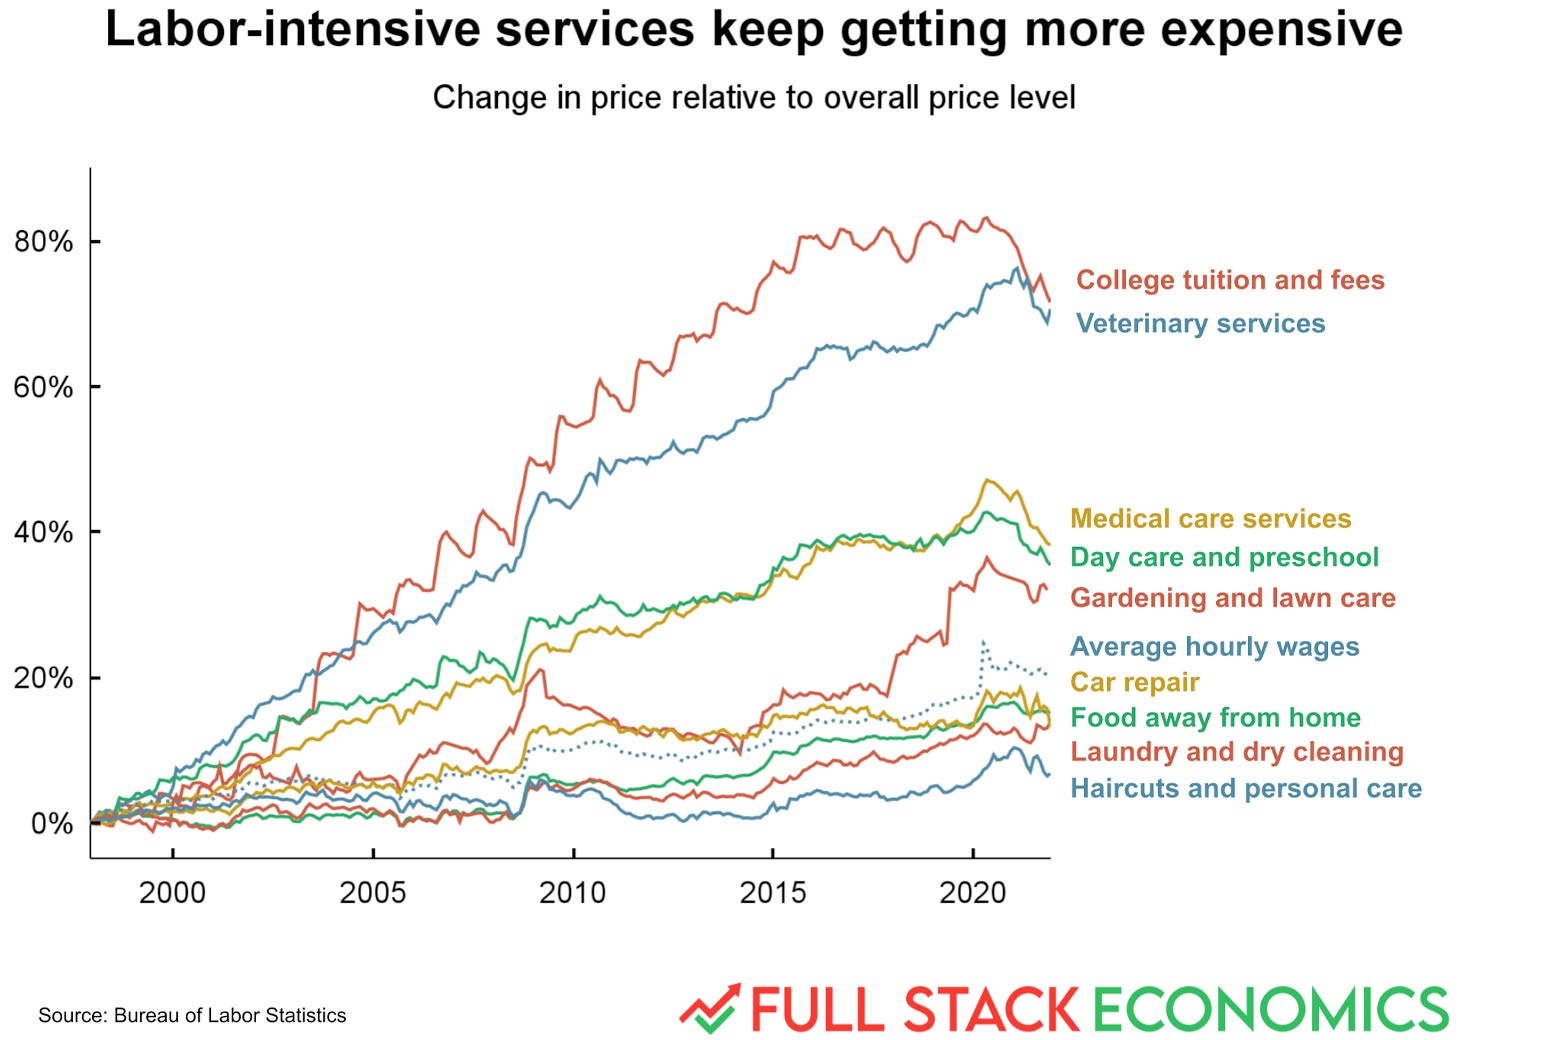 Chart showing increase in prices of labor-intensive services from 2000 to 2020 with college tuition and fees and veterinary services increasing the most